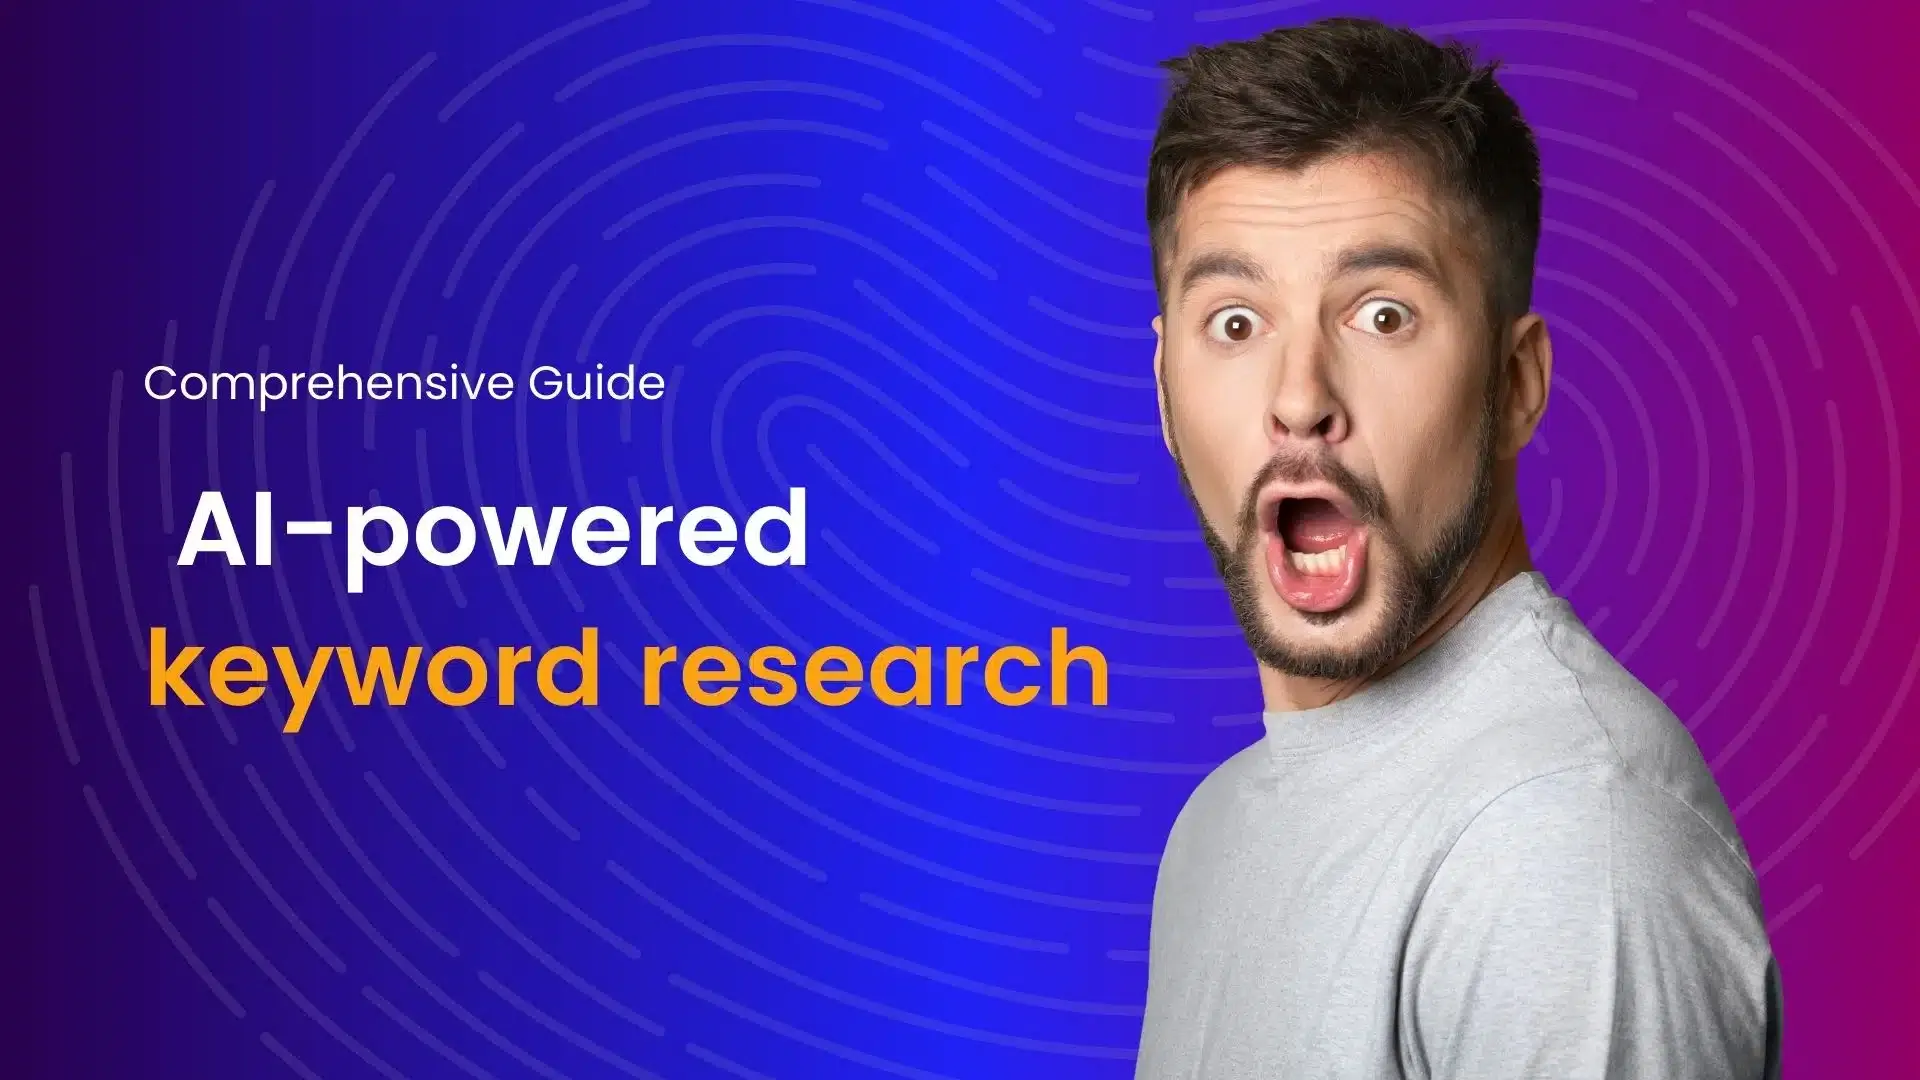 Best practices for AI-powered keyword research